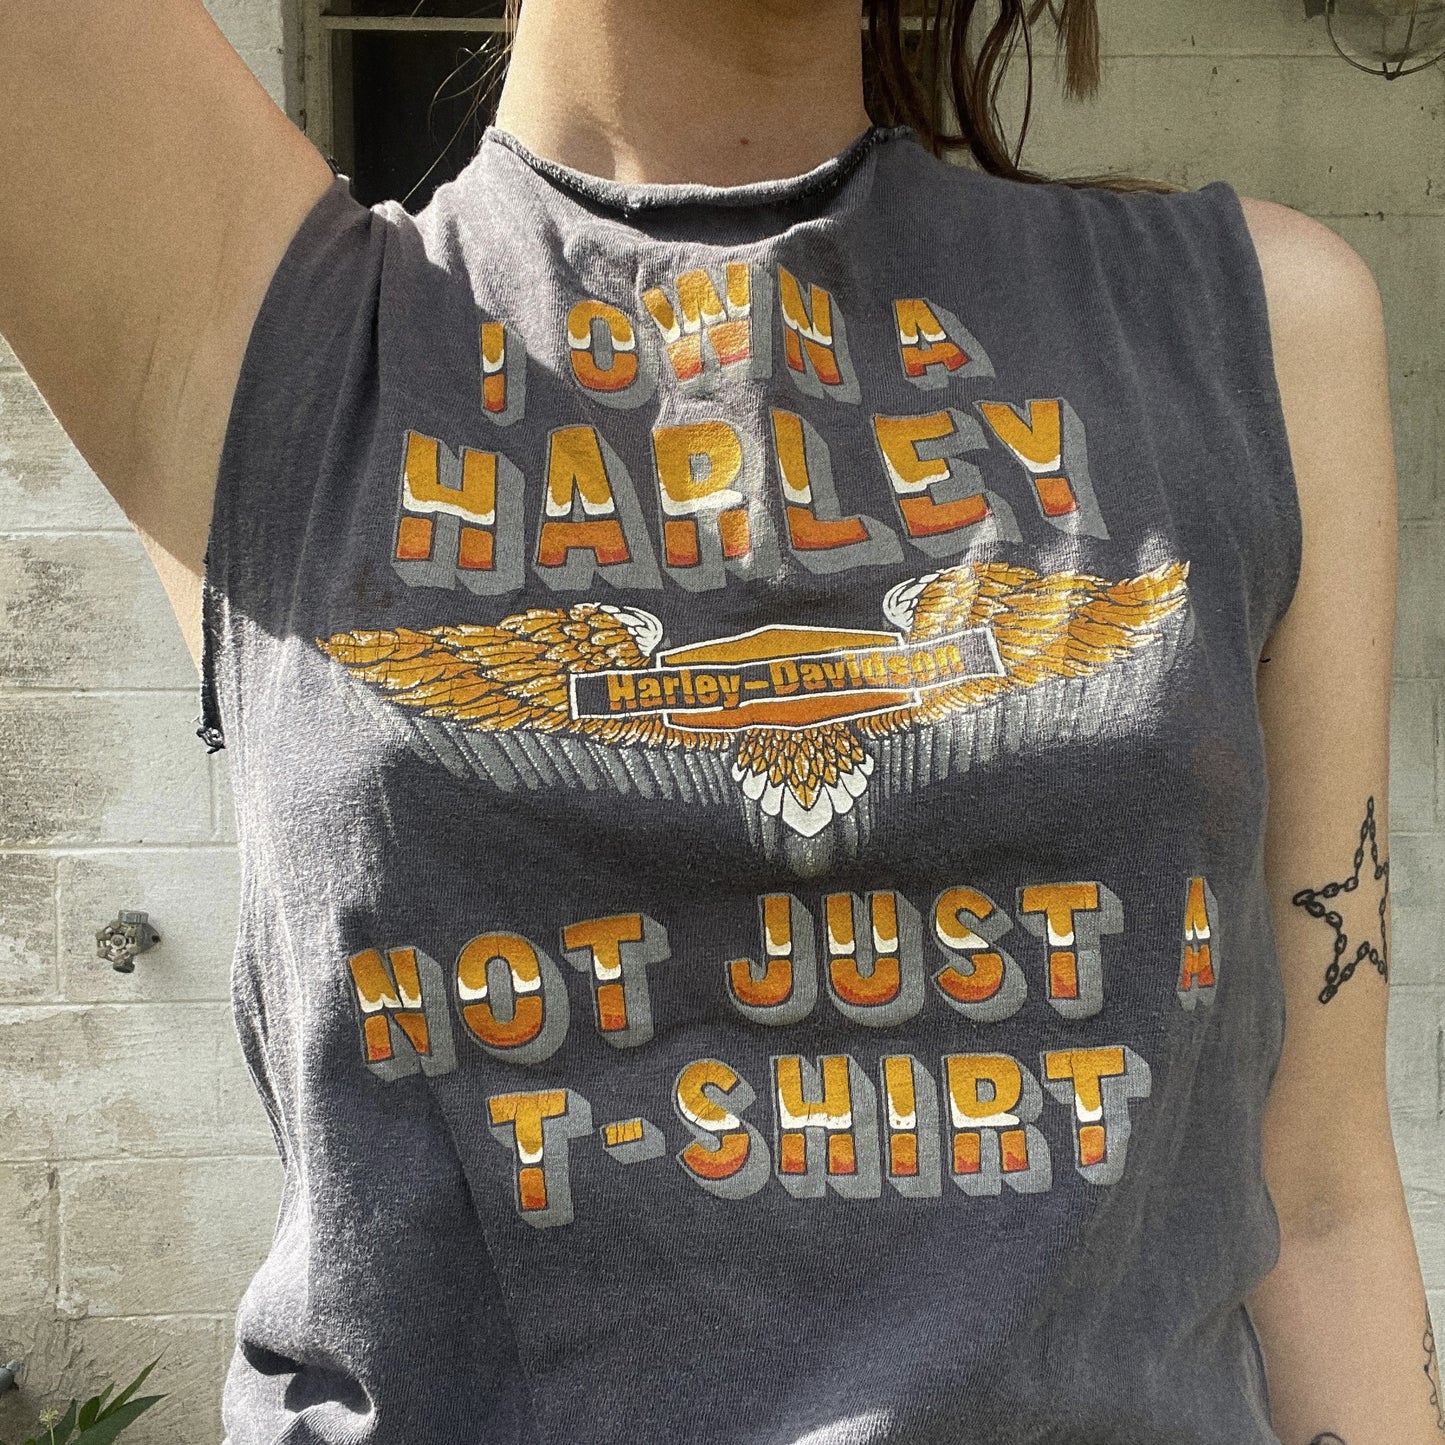 VTG 90s "I Own A Harley' Muscle Tee